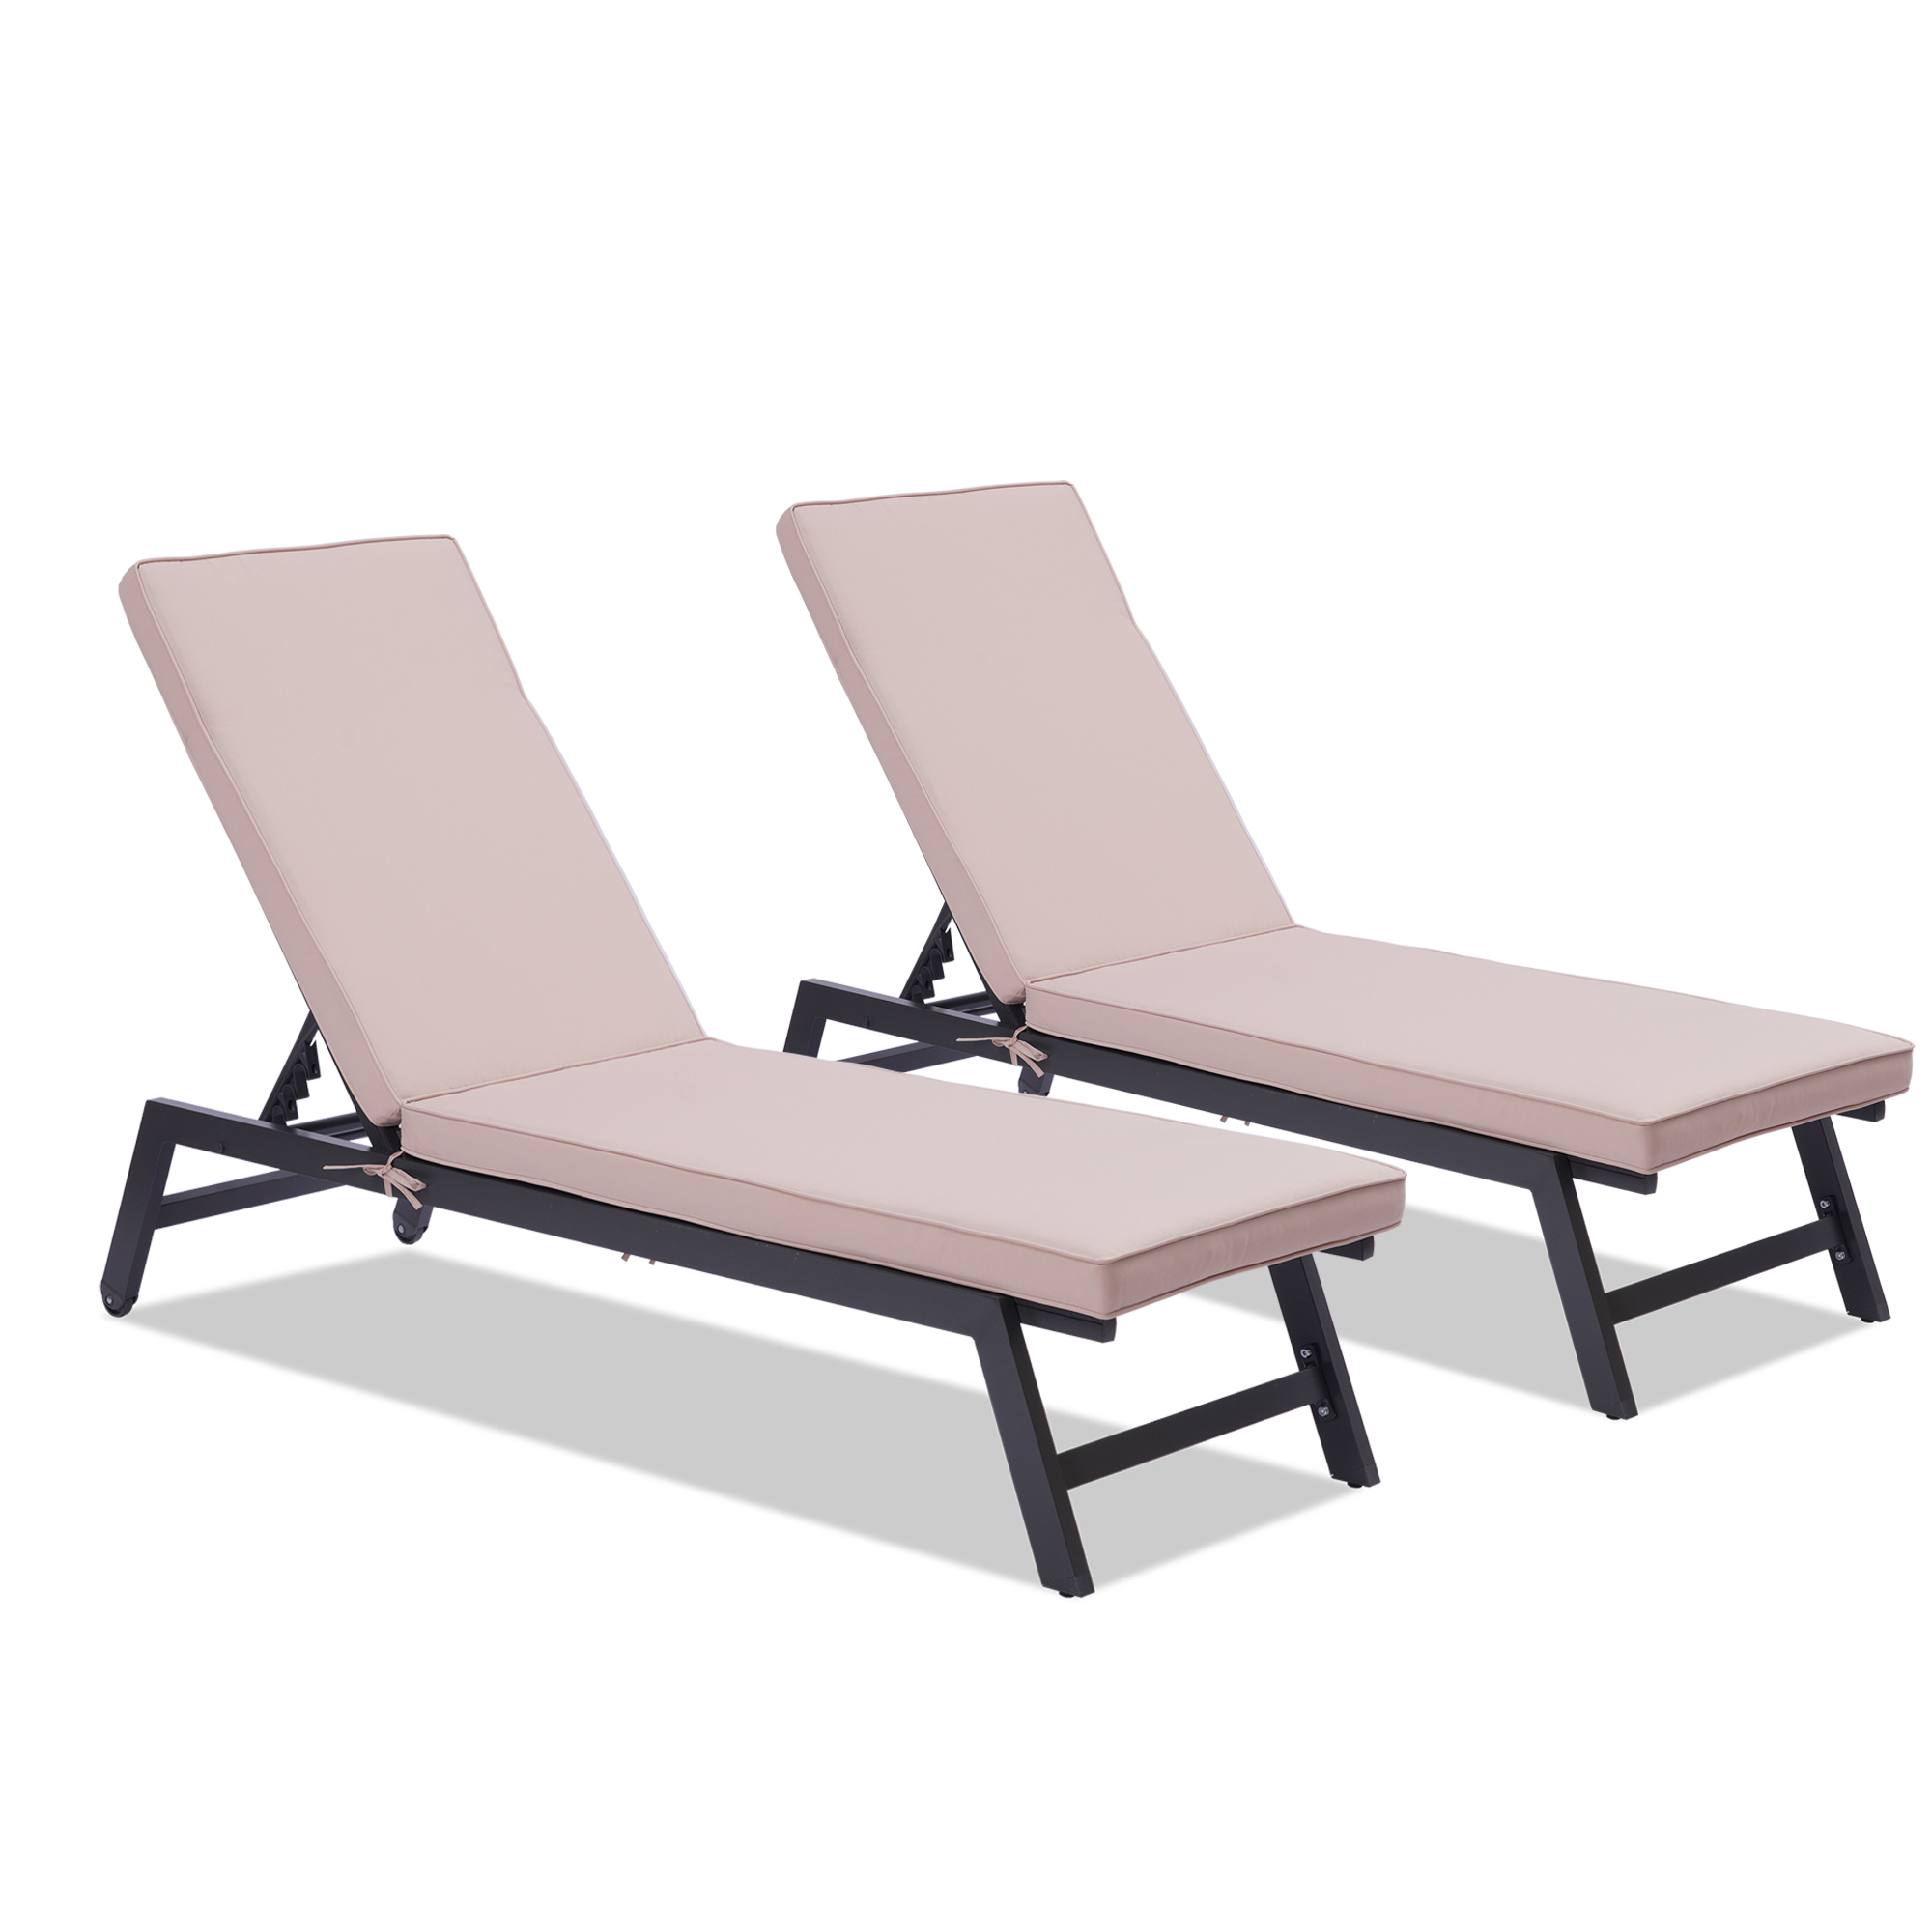 Outdoor Chaise Lounge Chair Set With Cushions, Five-Position Adjustable Aluminum Recliner,All Weather For Patio,Beach,Yard, Pool-Boyel Living